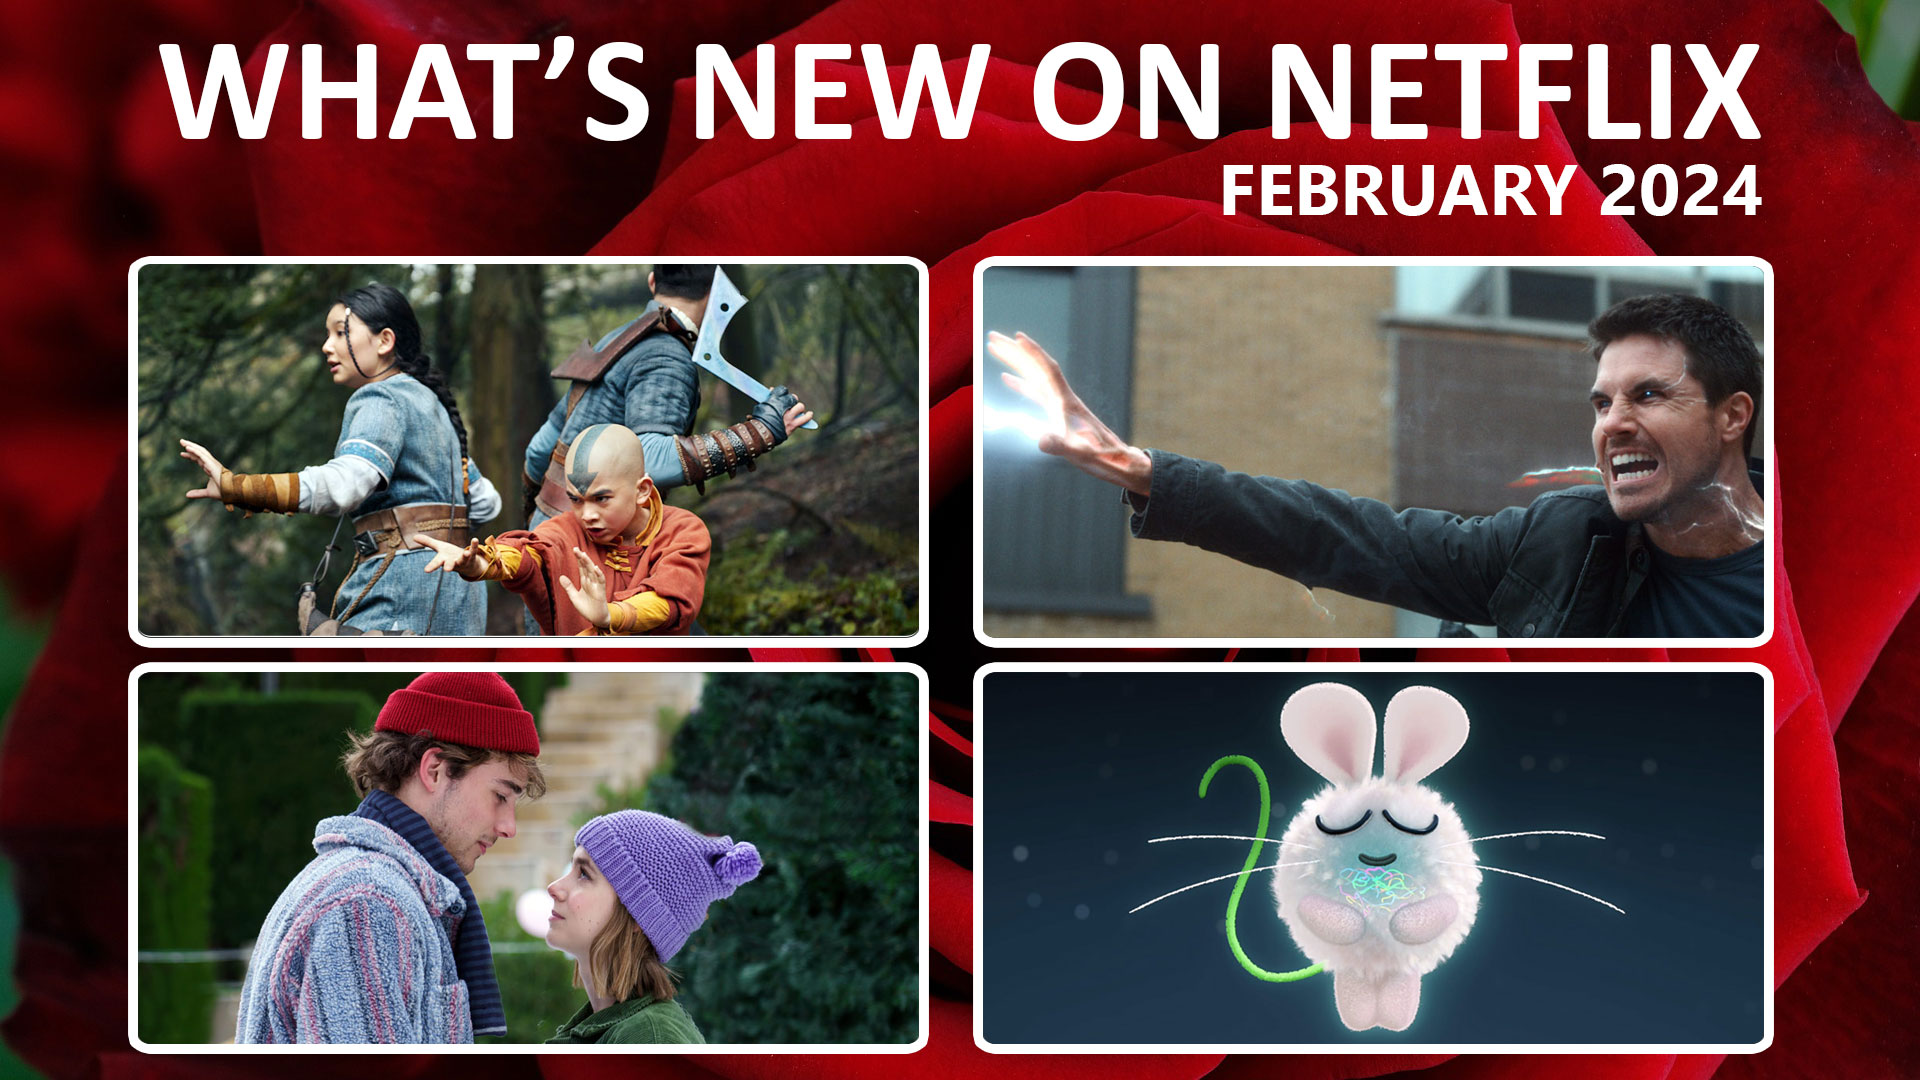 What's new on Netflix February 2024